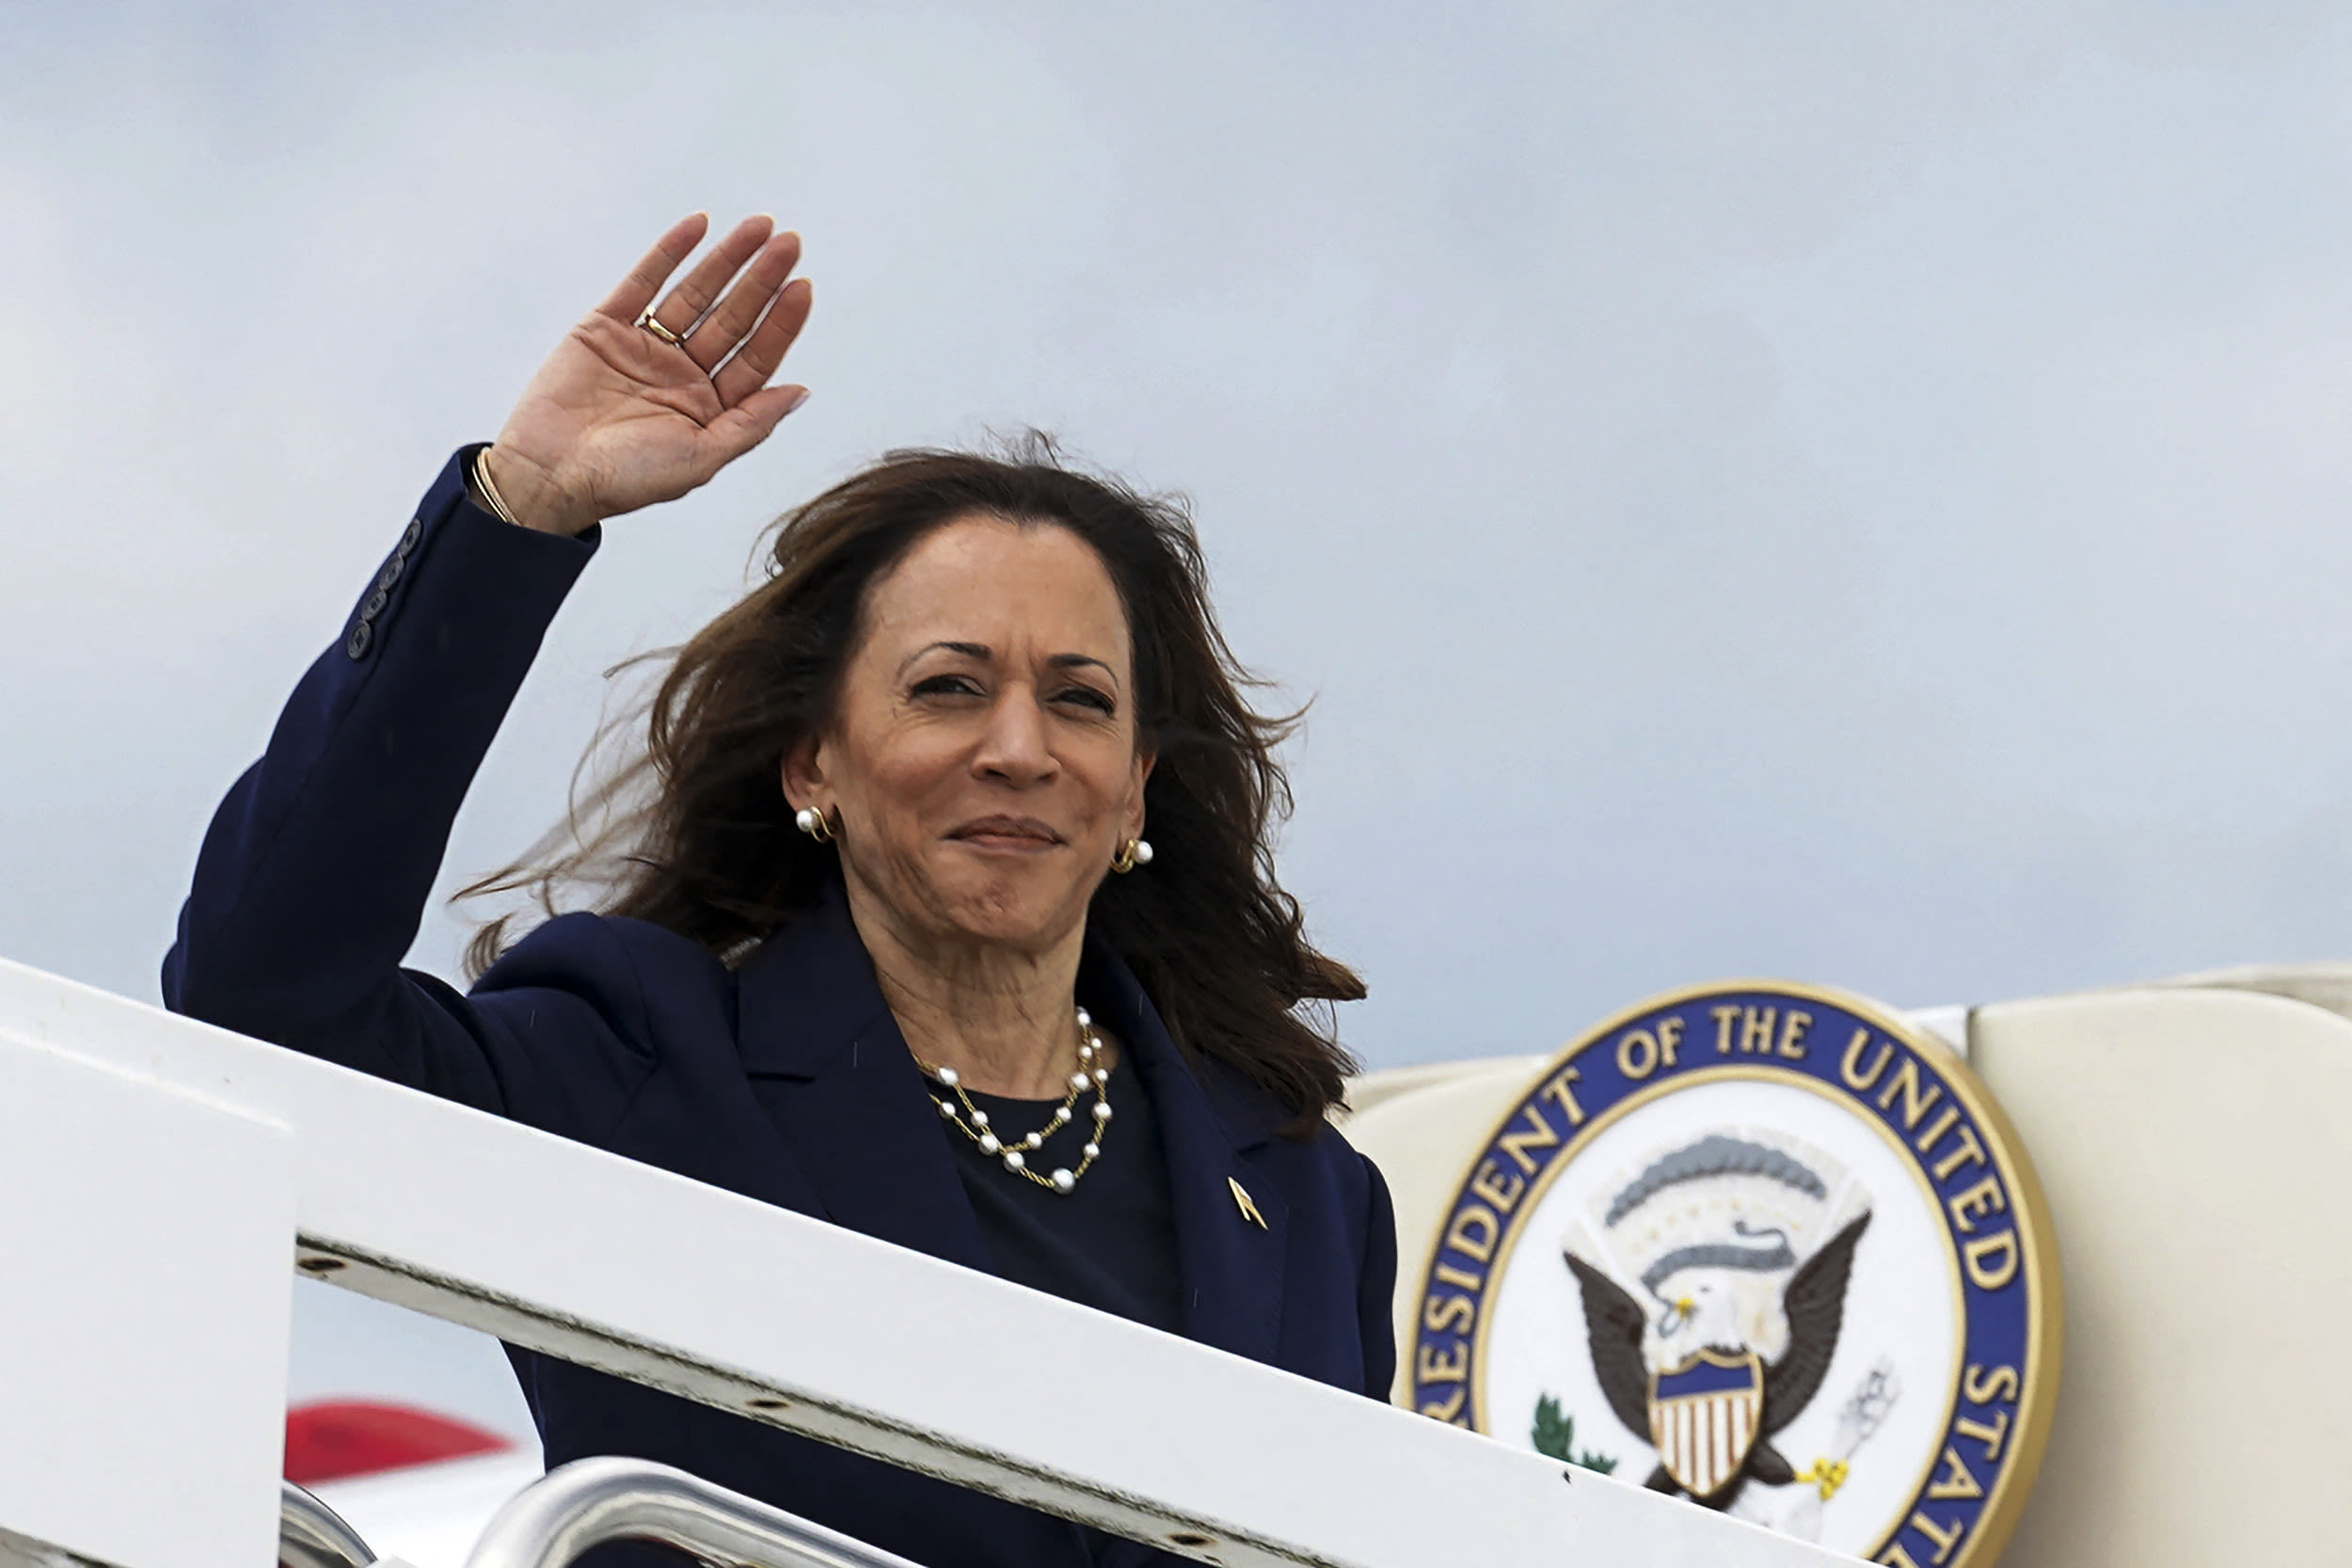 US polling "Nostradamus" reveals who he thinks Harris should pick as VP